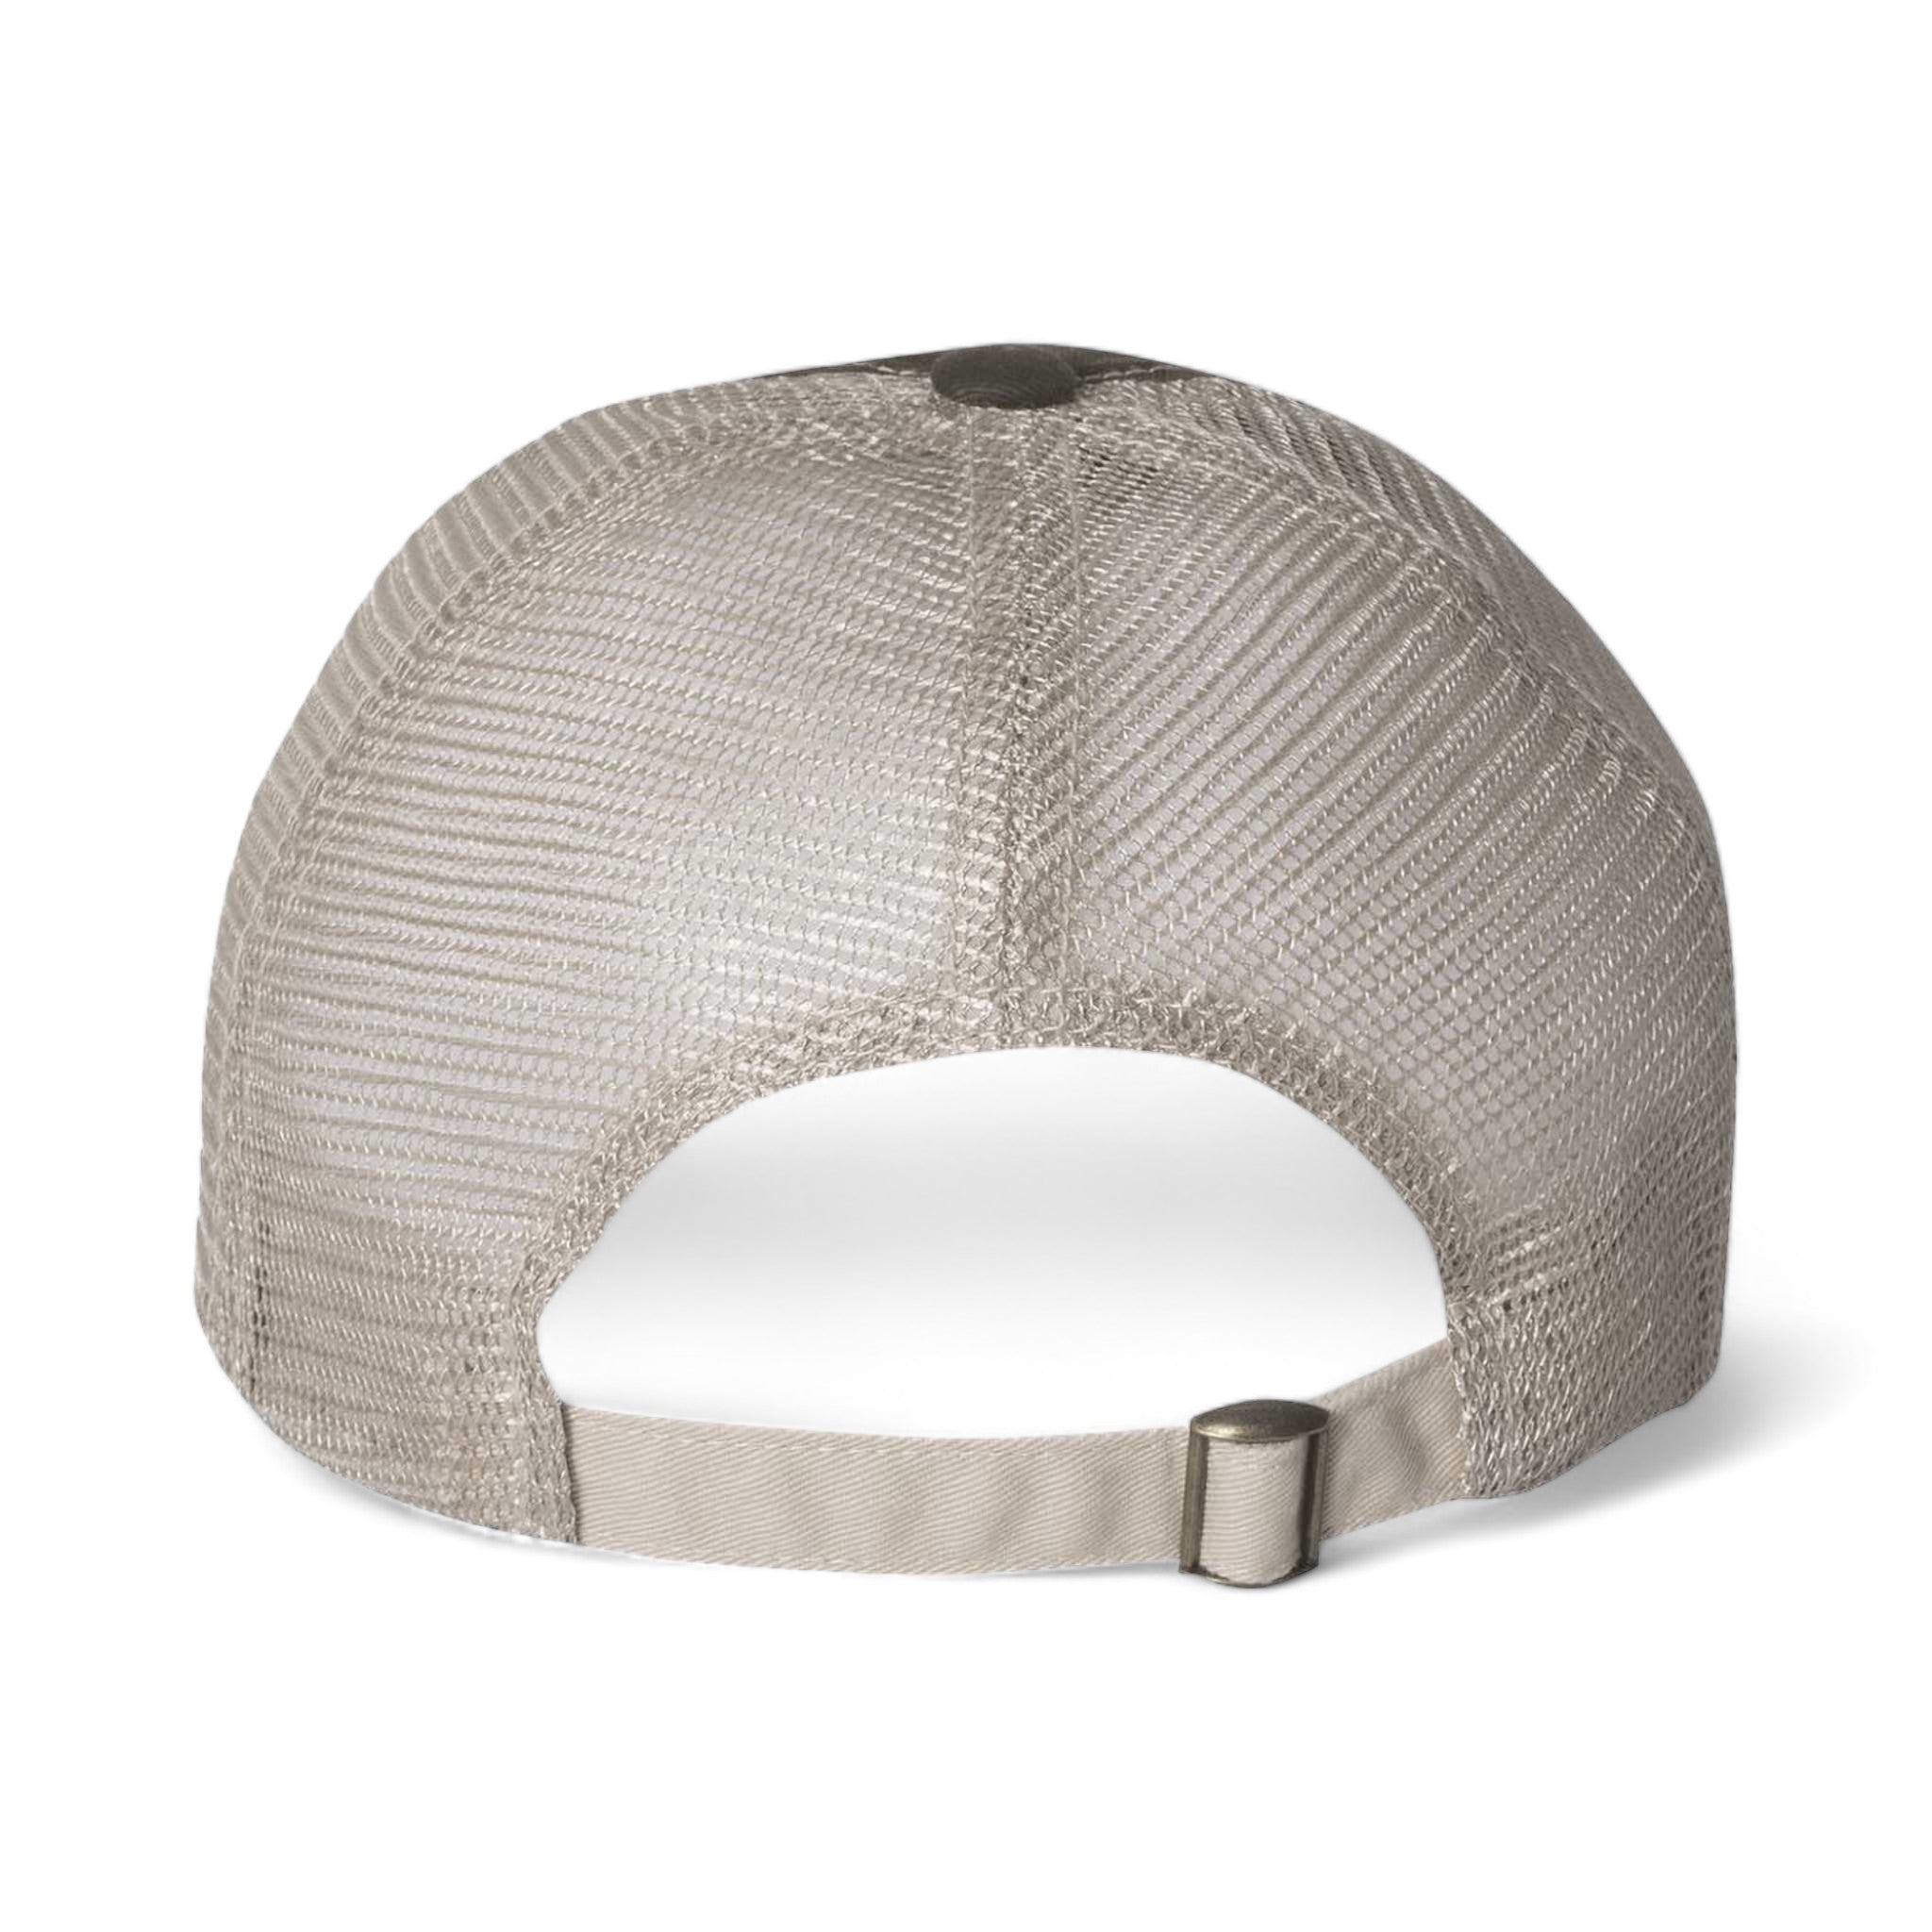 Back view of Sportsman 3100 custom hat in olive and khaki